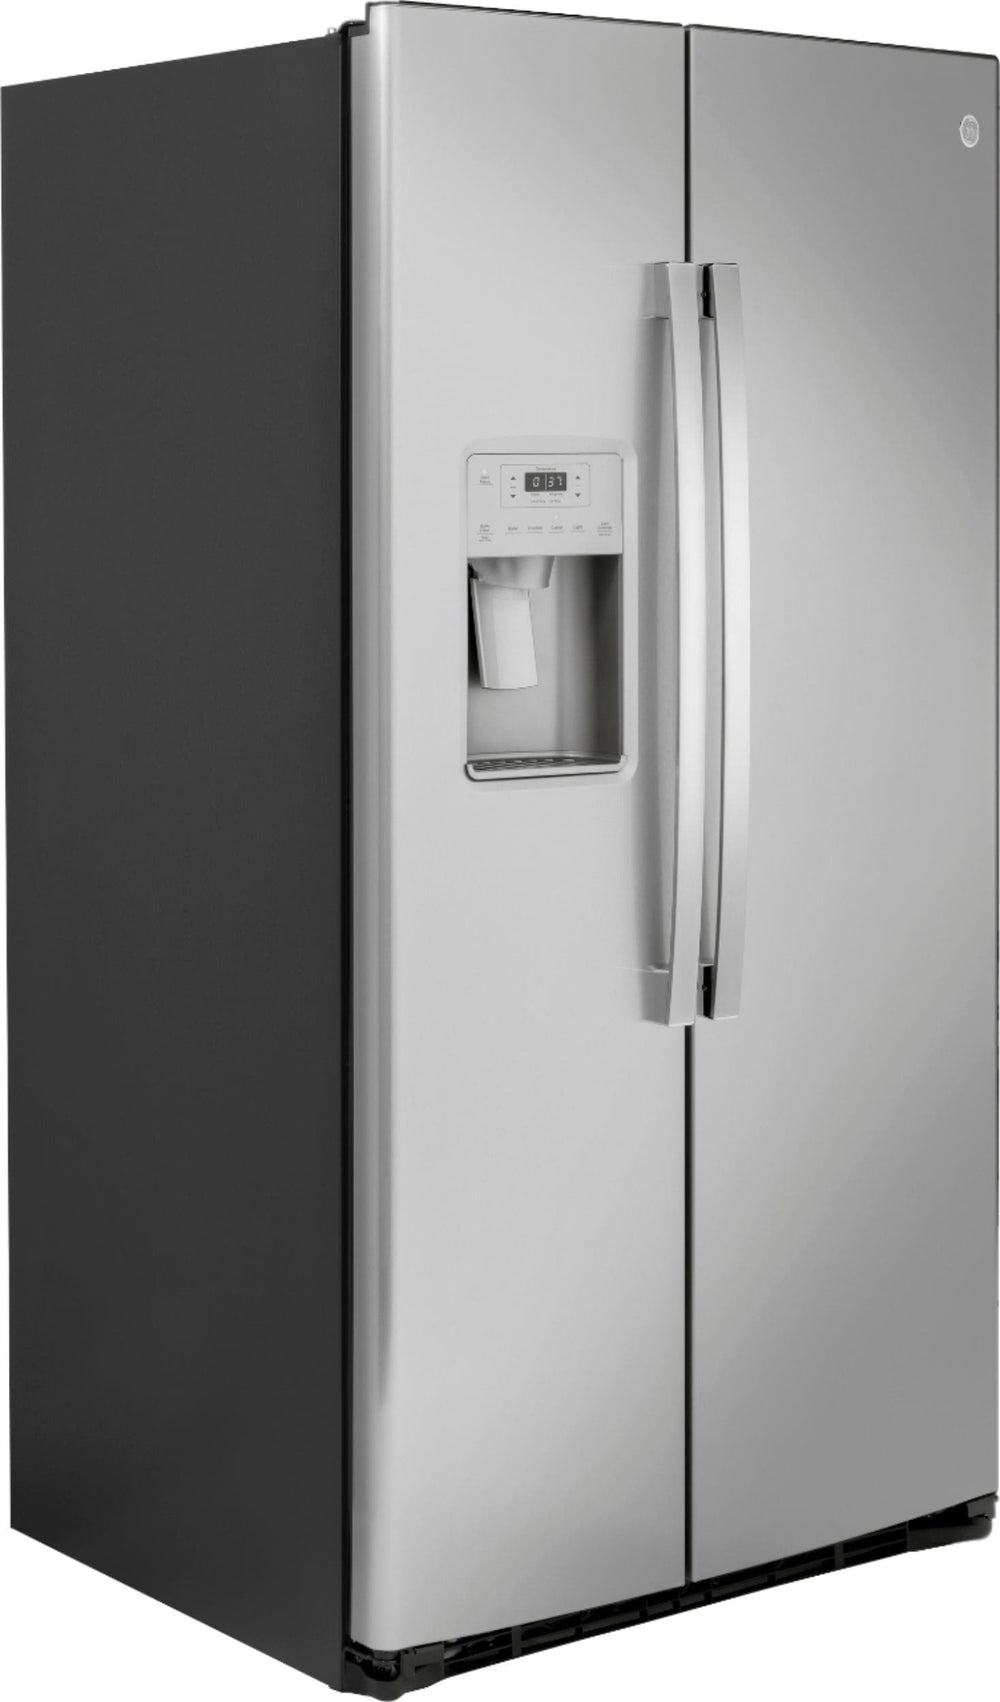 GE - 25.1 Cu. Ft. Side-By-Side Refrigerator with External Ice & Water Dispenser - Stainless steel_1